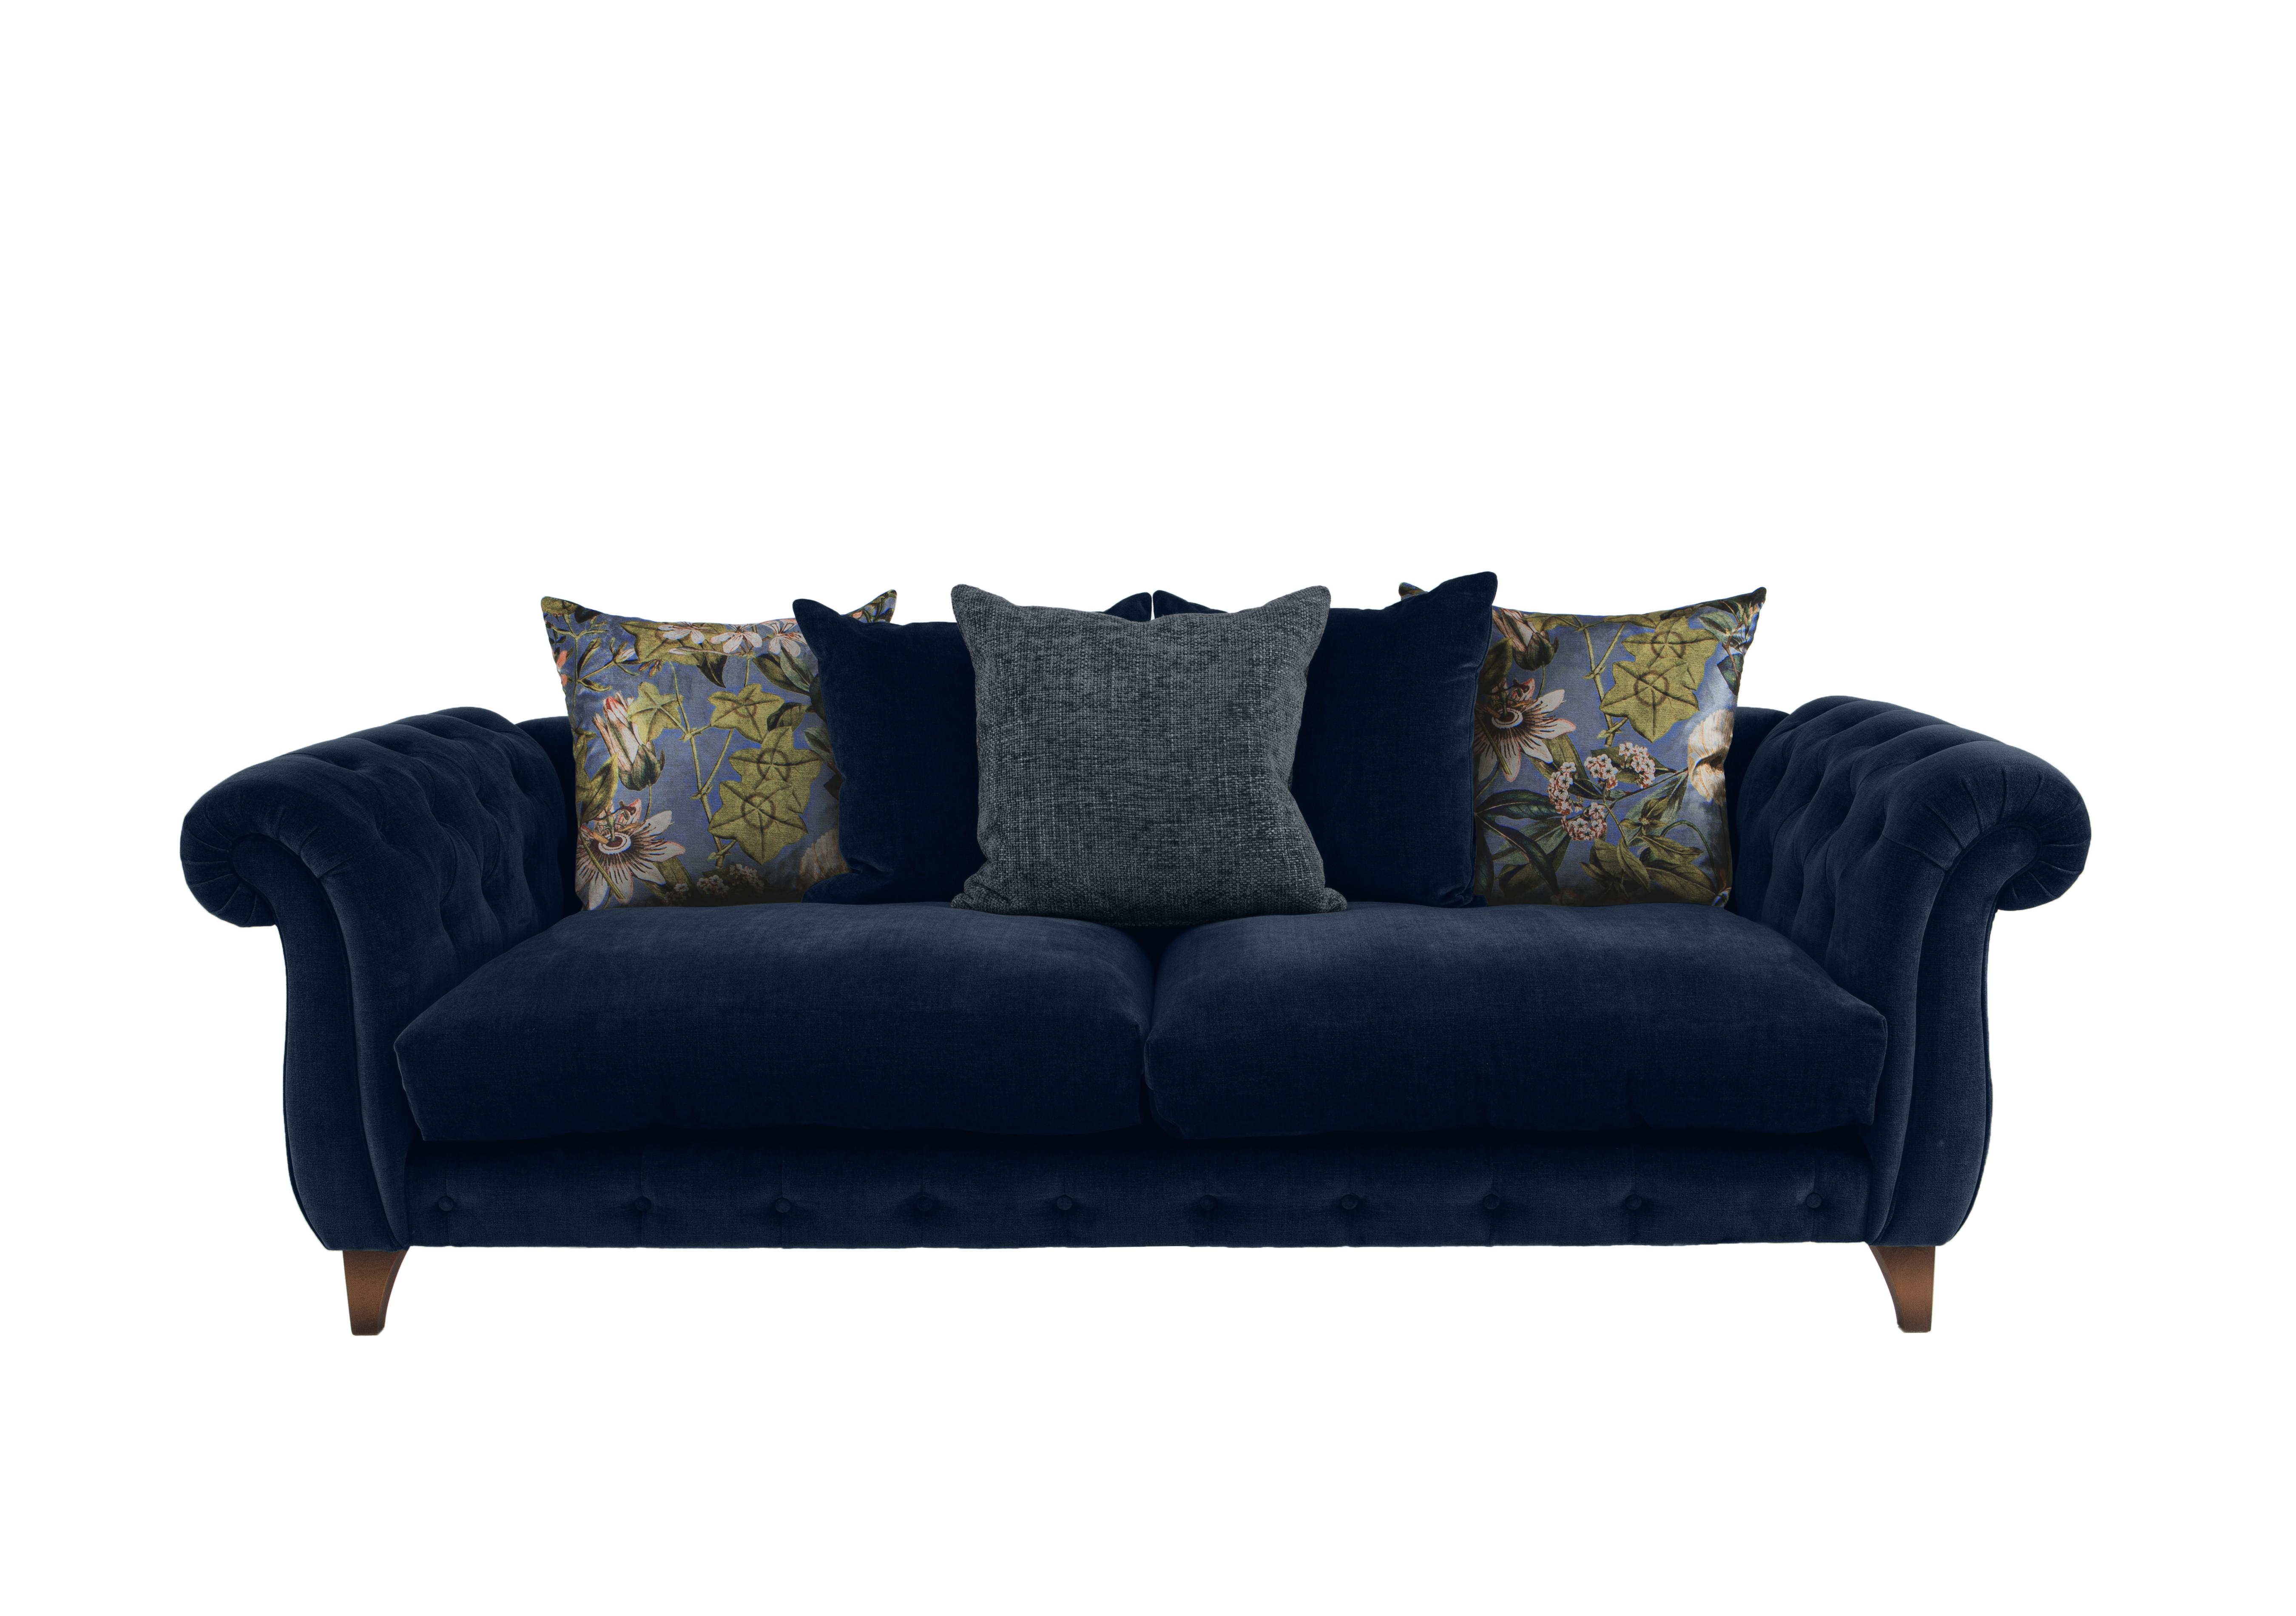 Boutique Palace Fabric 3 Seater Scatter Back Sofa in Oasis Navy on Furniture Village